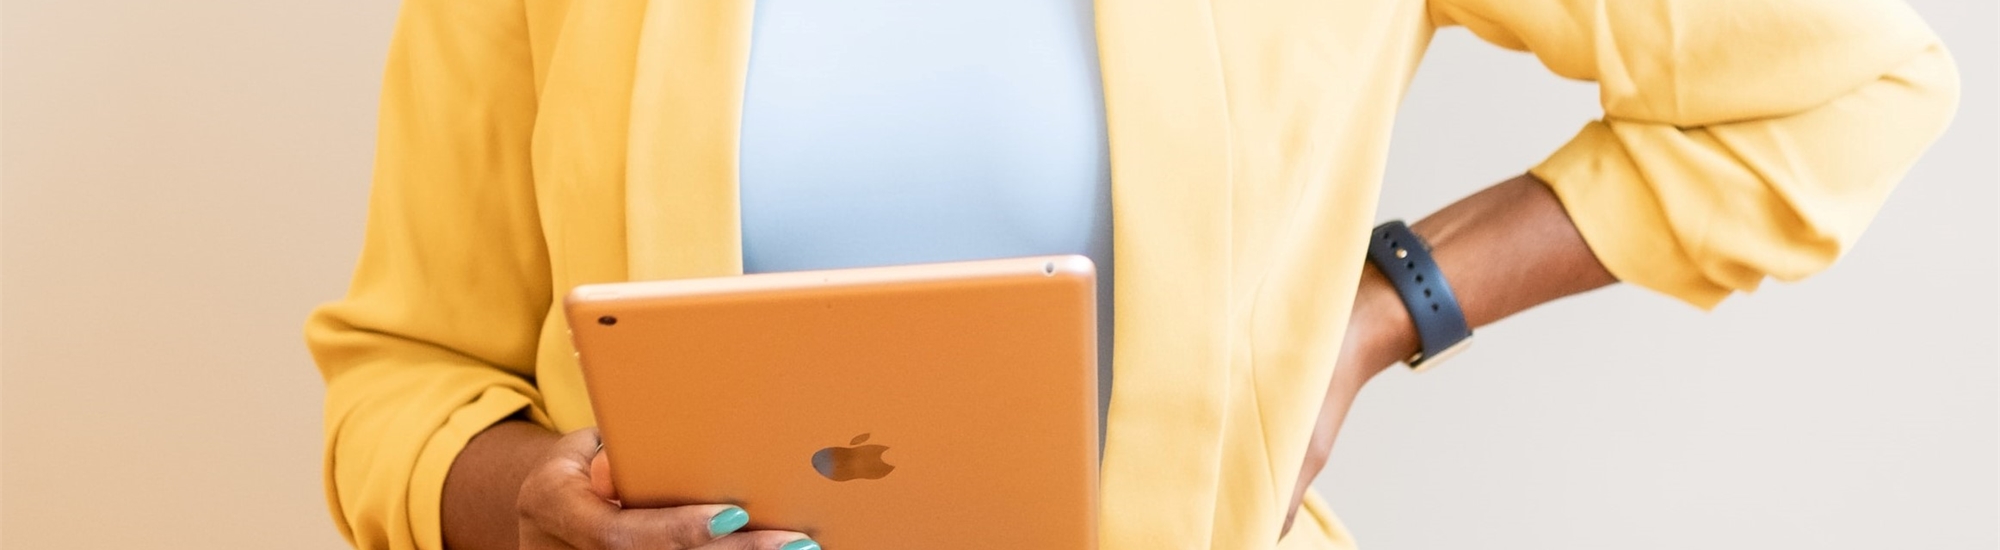 A person holding an iPad wearing a yellow jacket